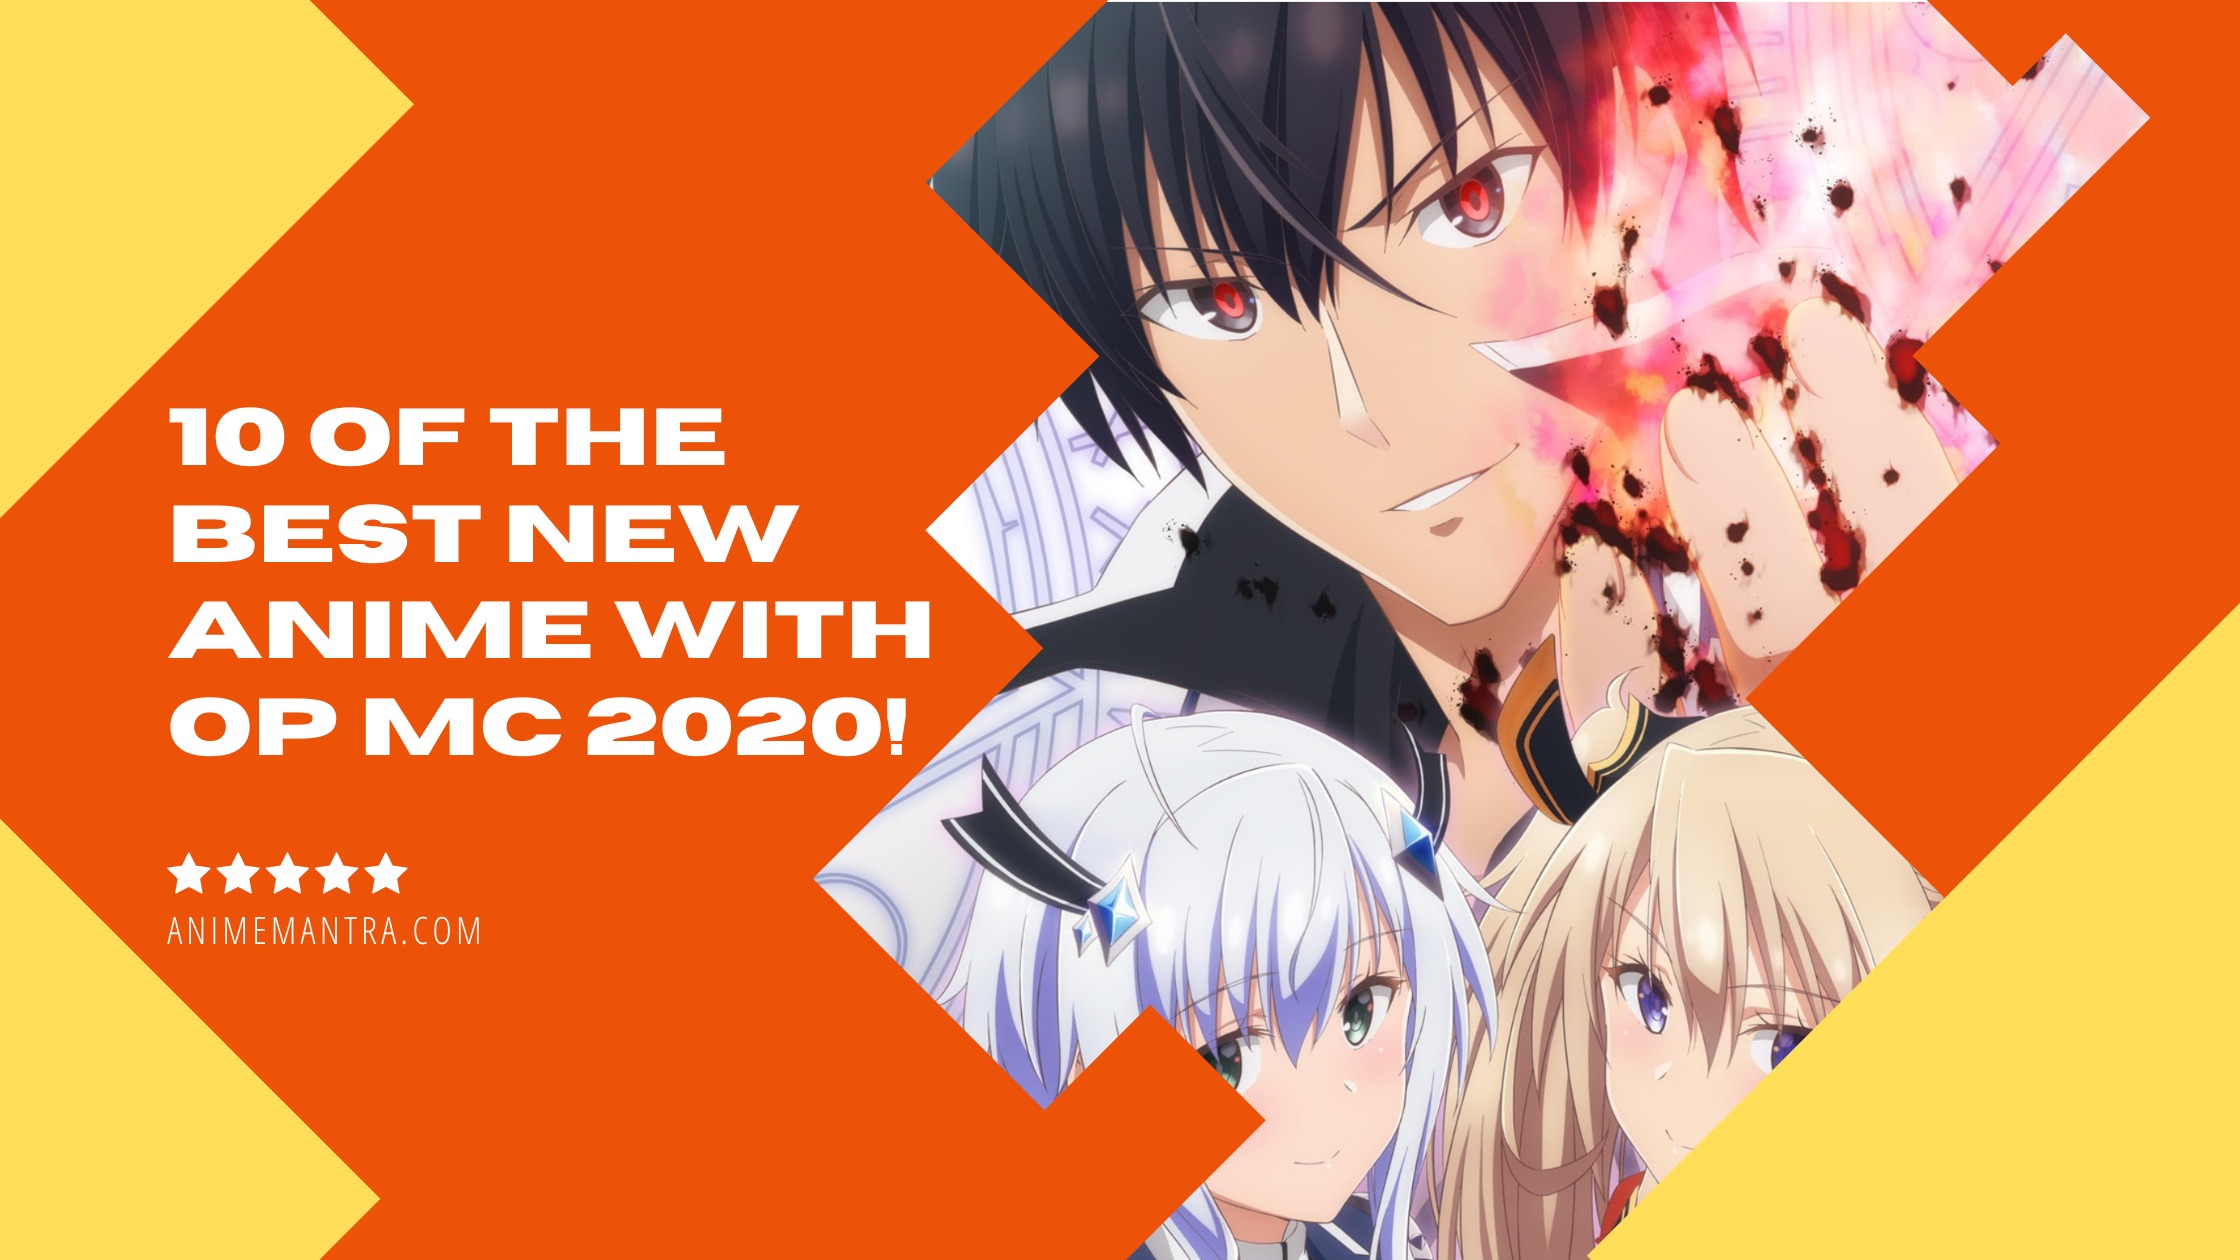 10 of the Best New Anime with Op MC 2020 (They nailed it!) - Anime Mantra